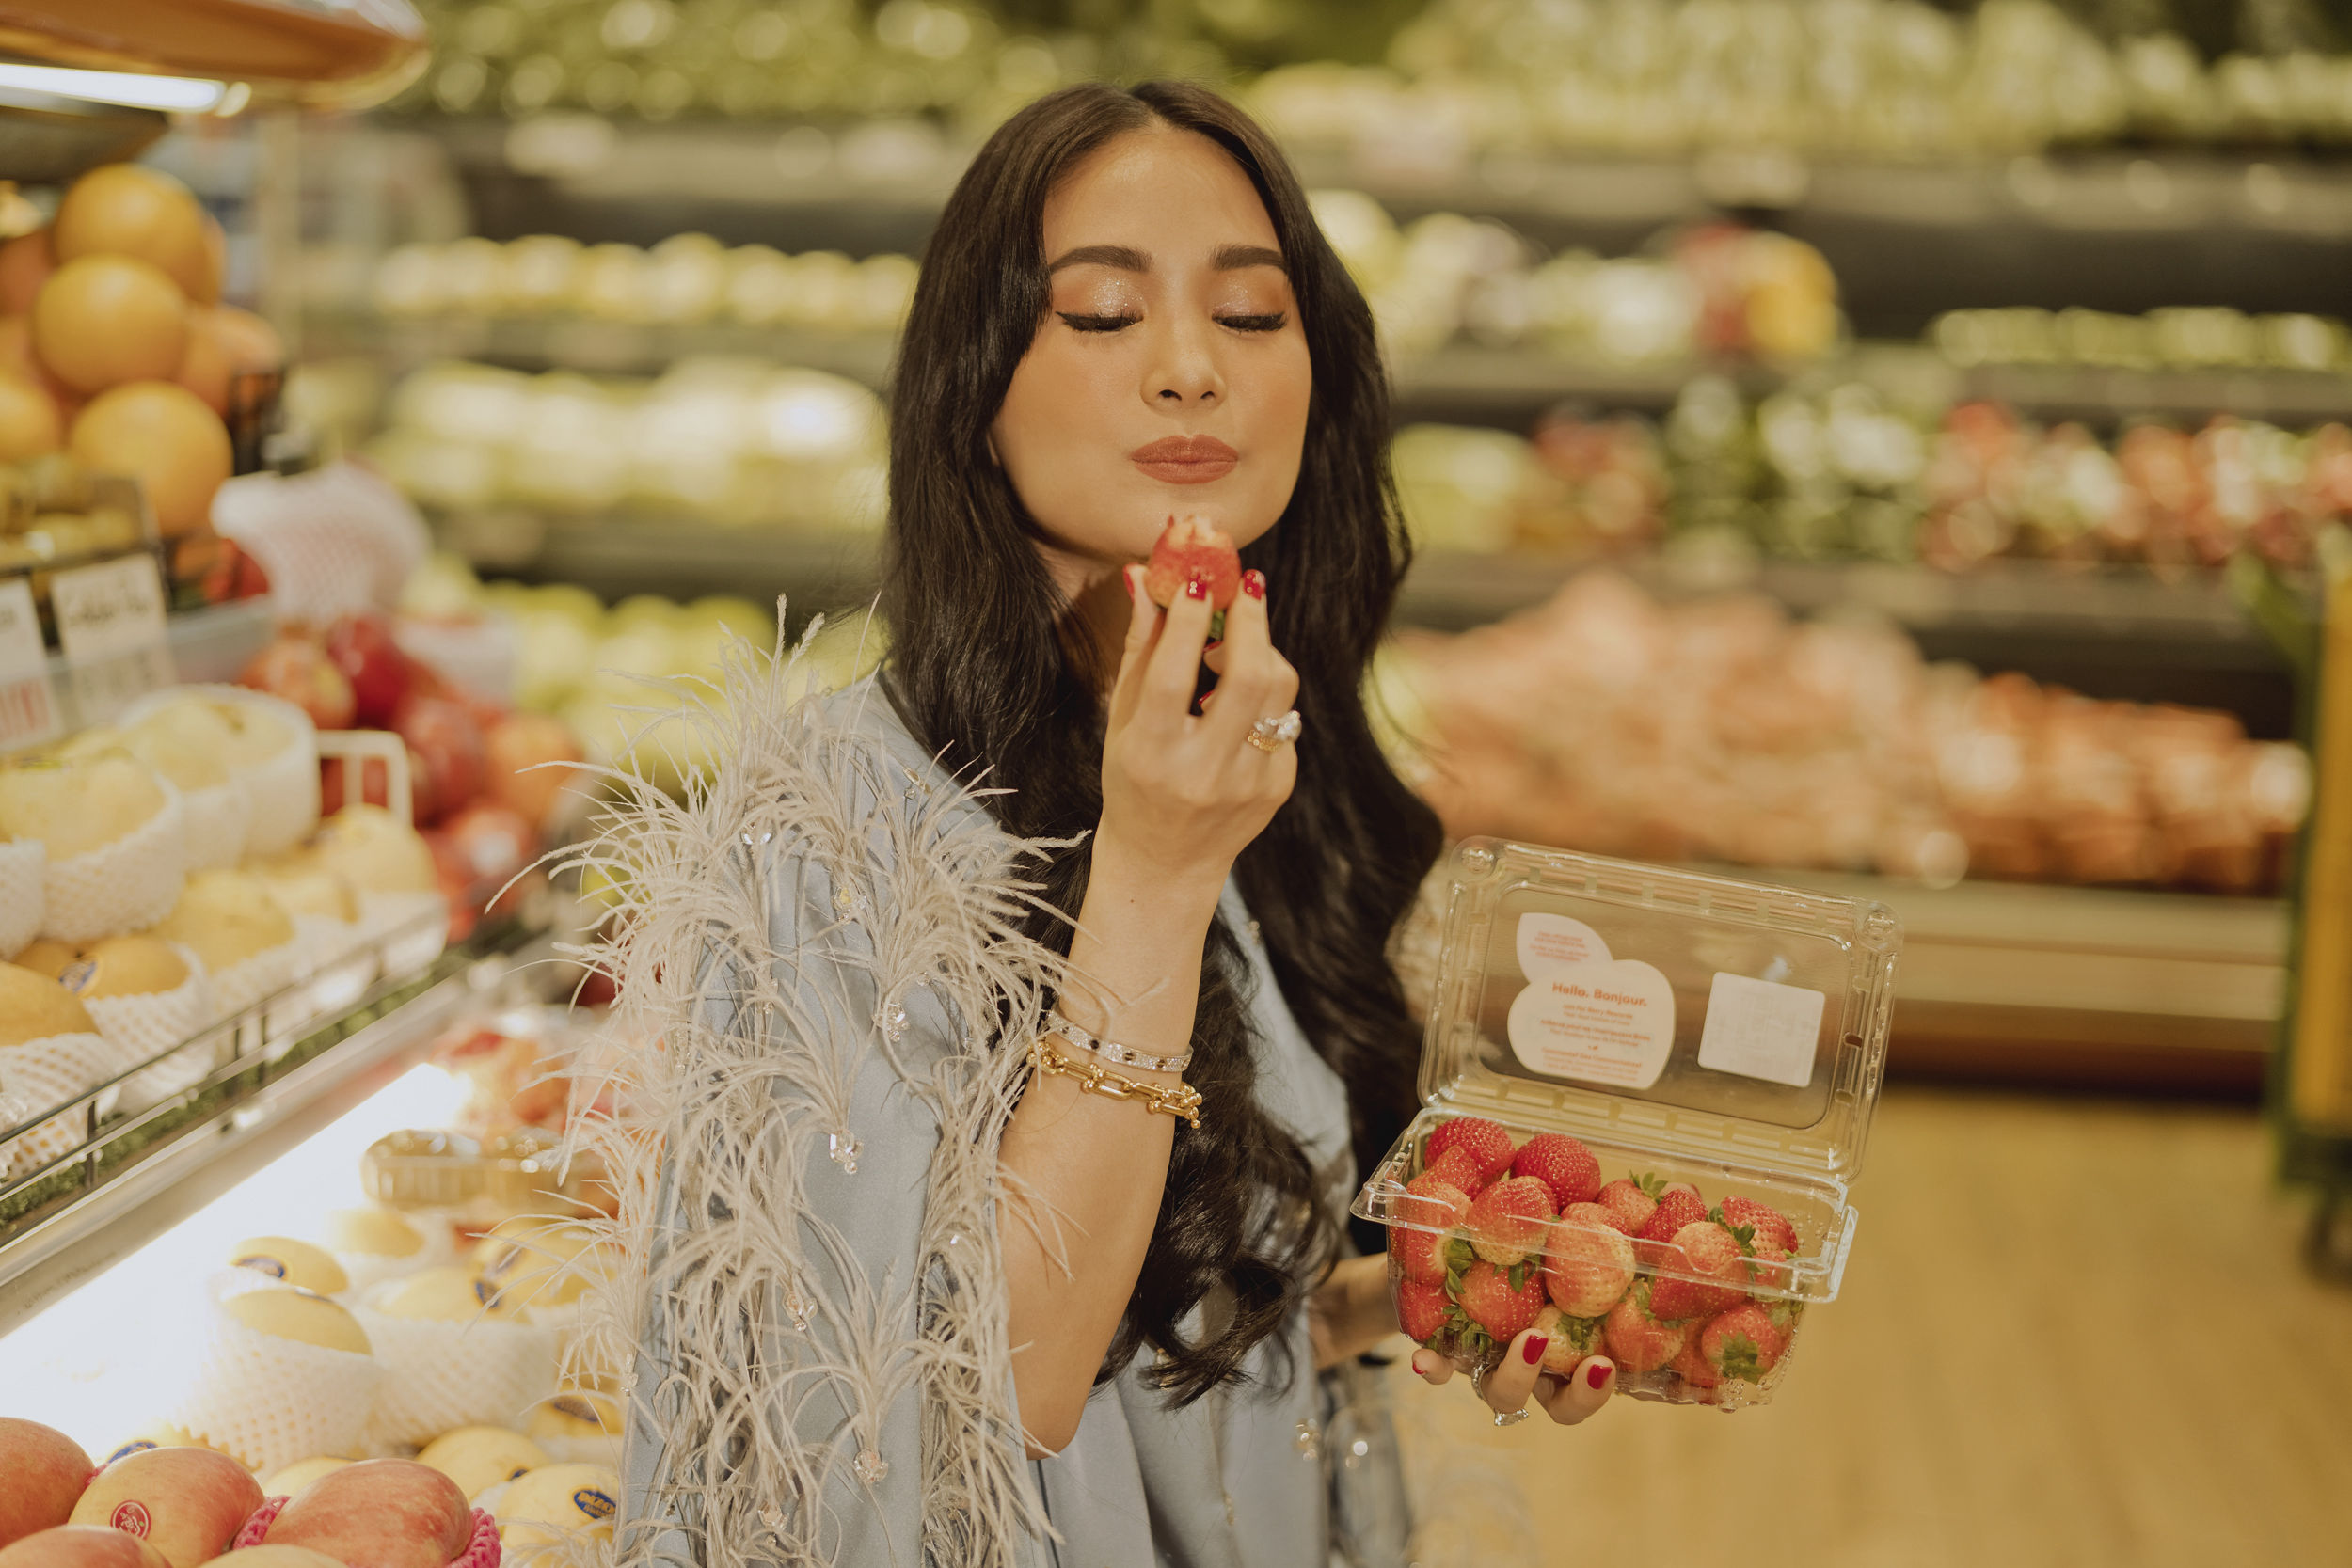 Thanks to a food stain, Heart Evangelista has a thriving career as